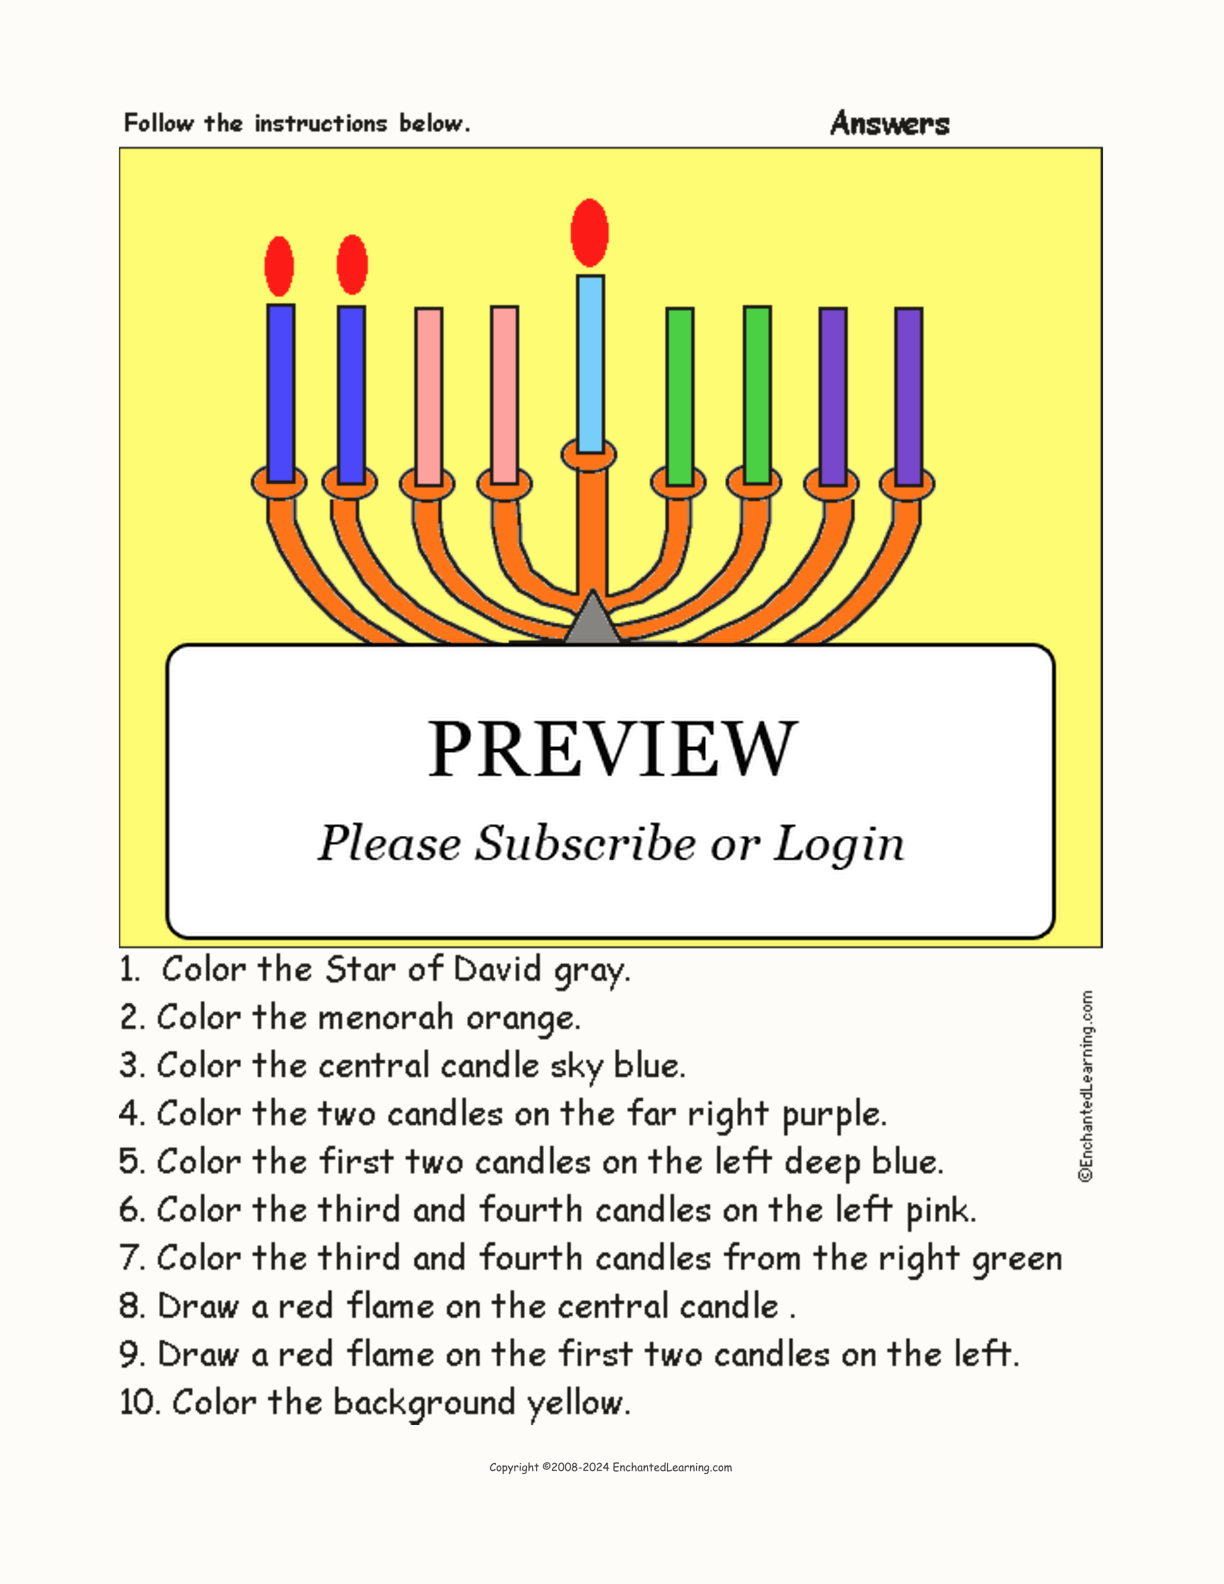 Menorah - Follow the Instructions interactive worksheet page 2